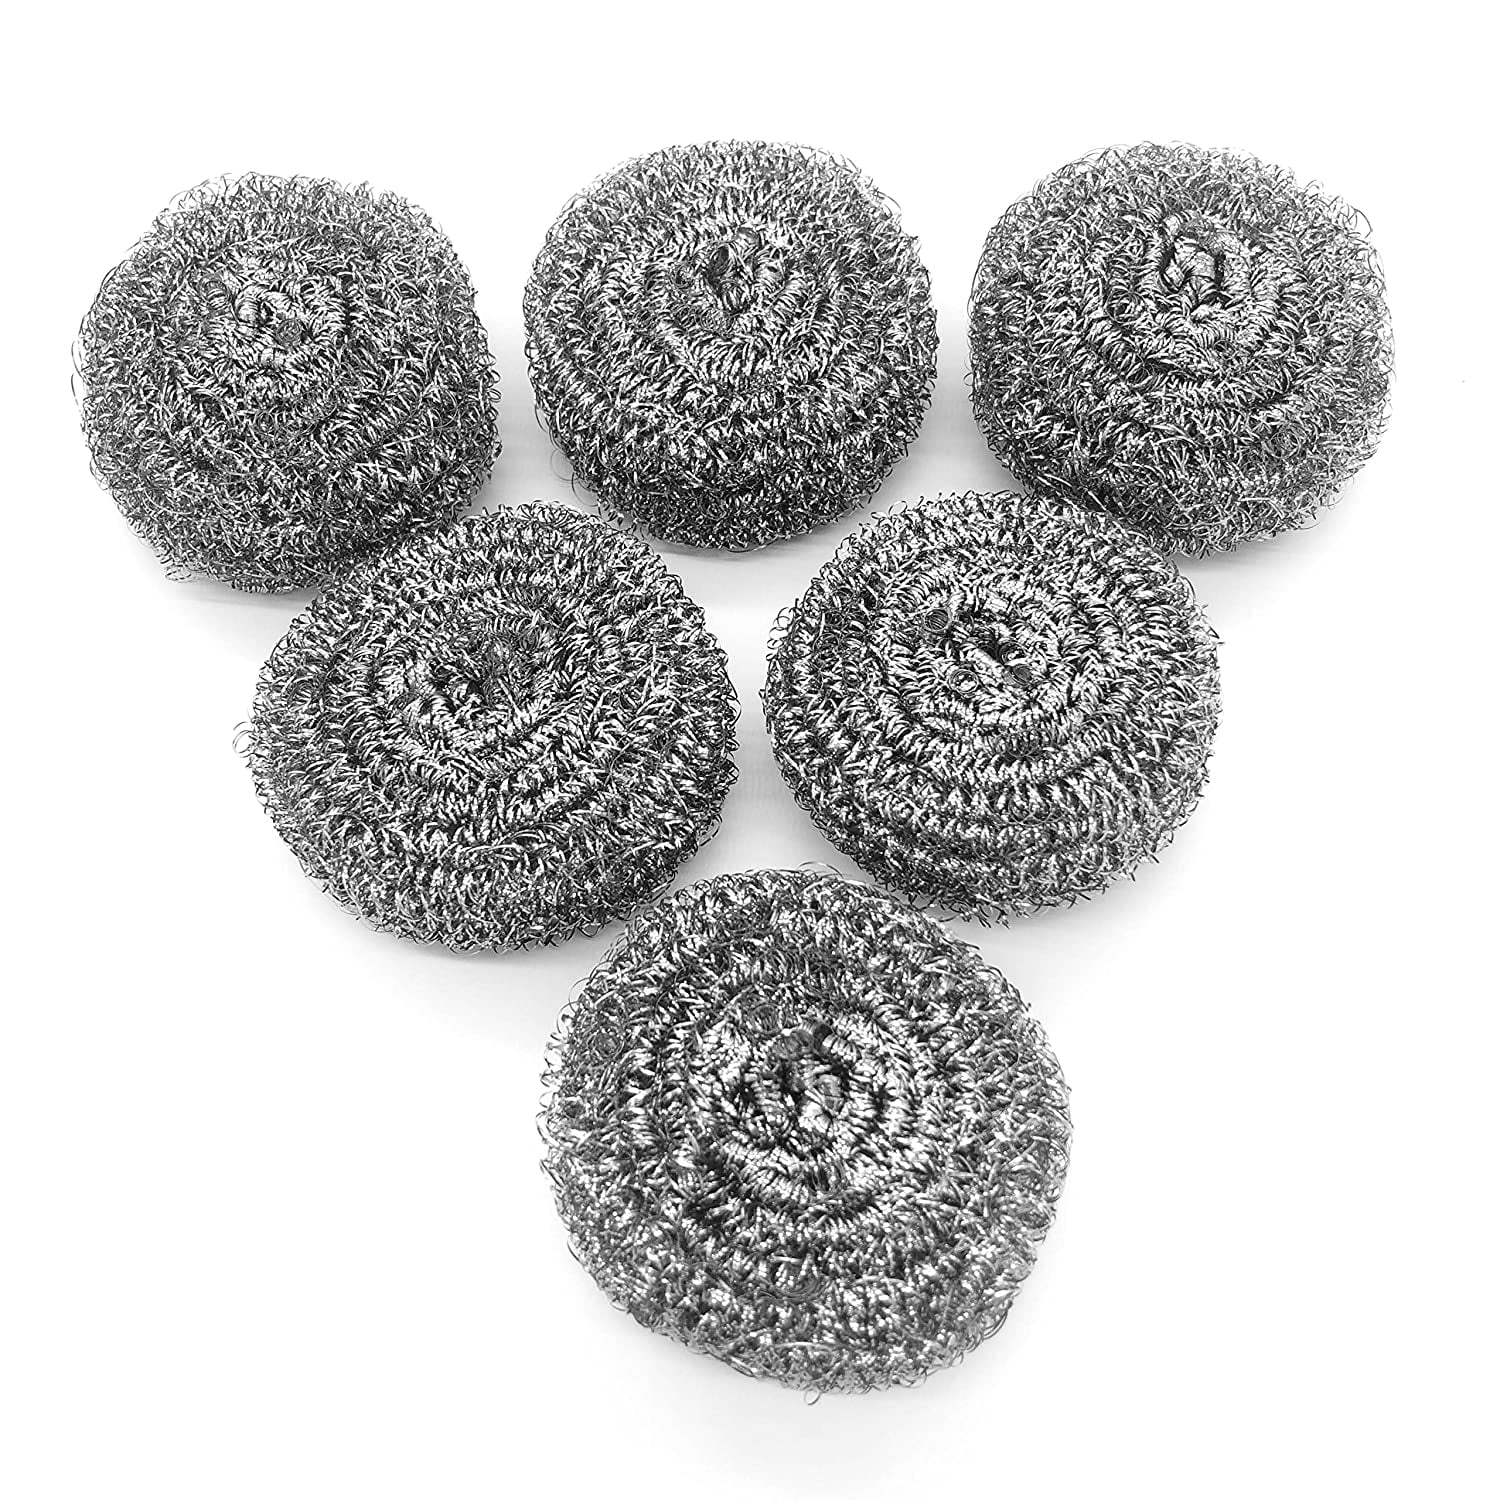 Pots Stainless Steel Scouring Pad and Ovens Pans 6Pcs Metal Scrubber Brush Steel Wool Used for Dishes